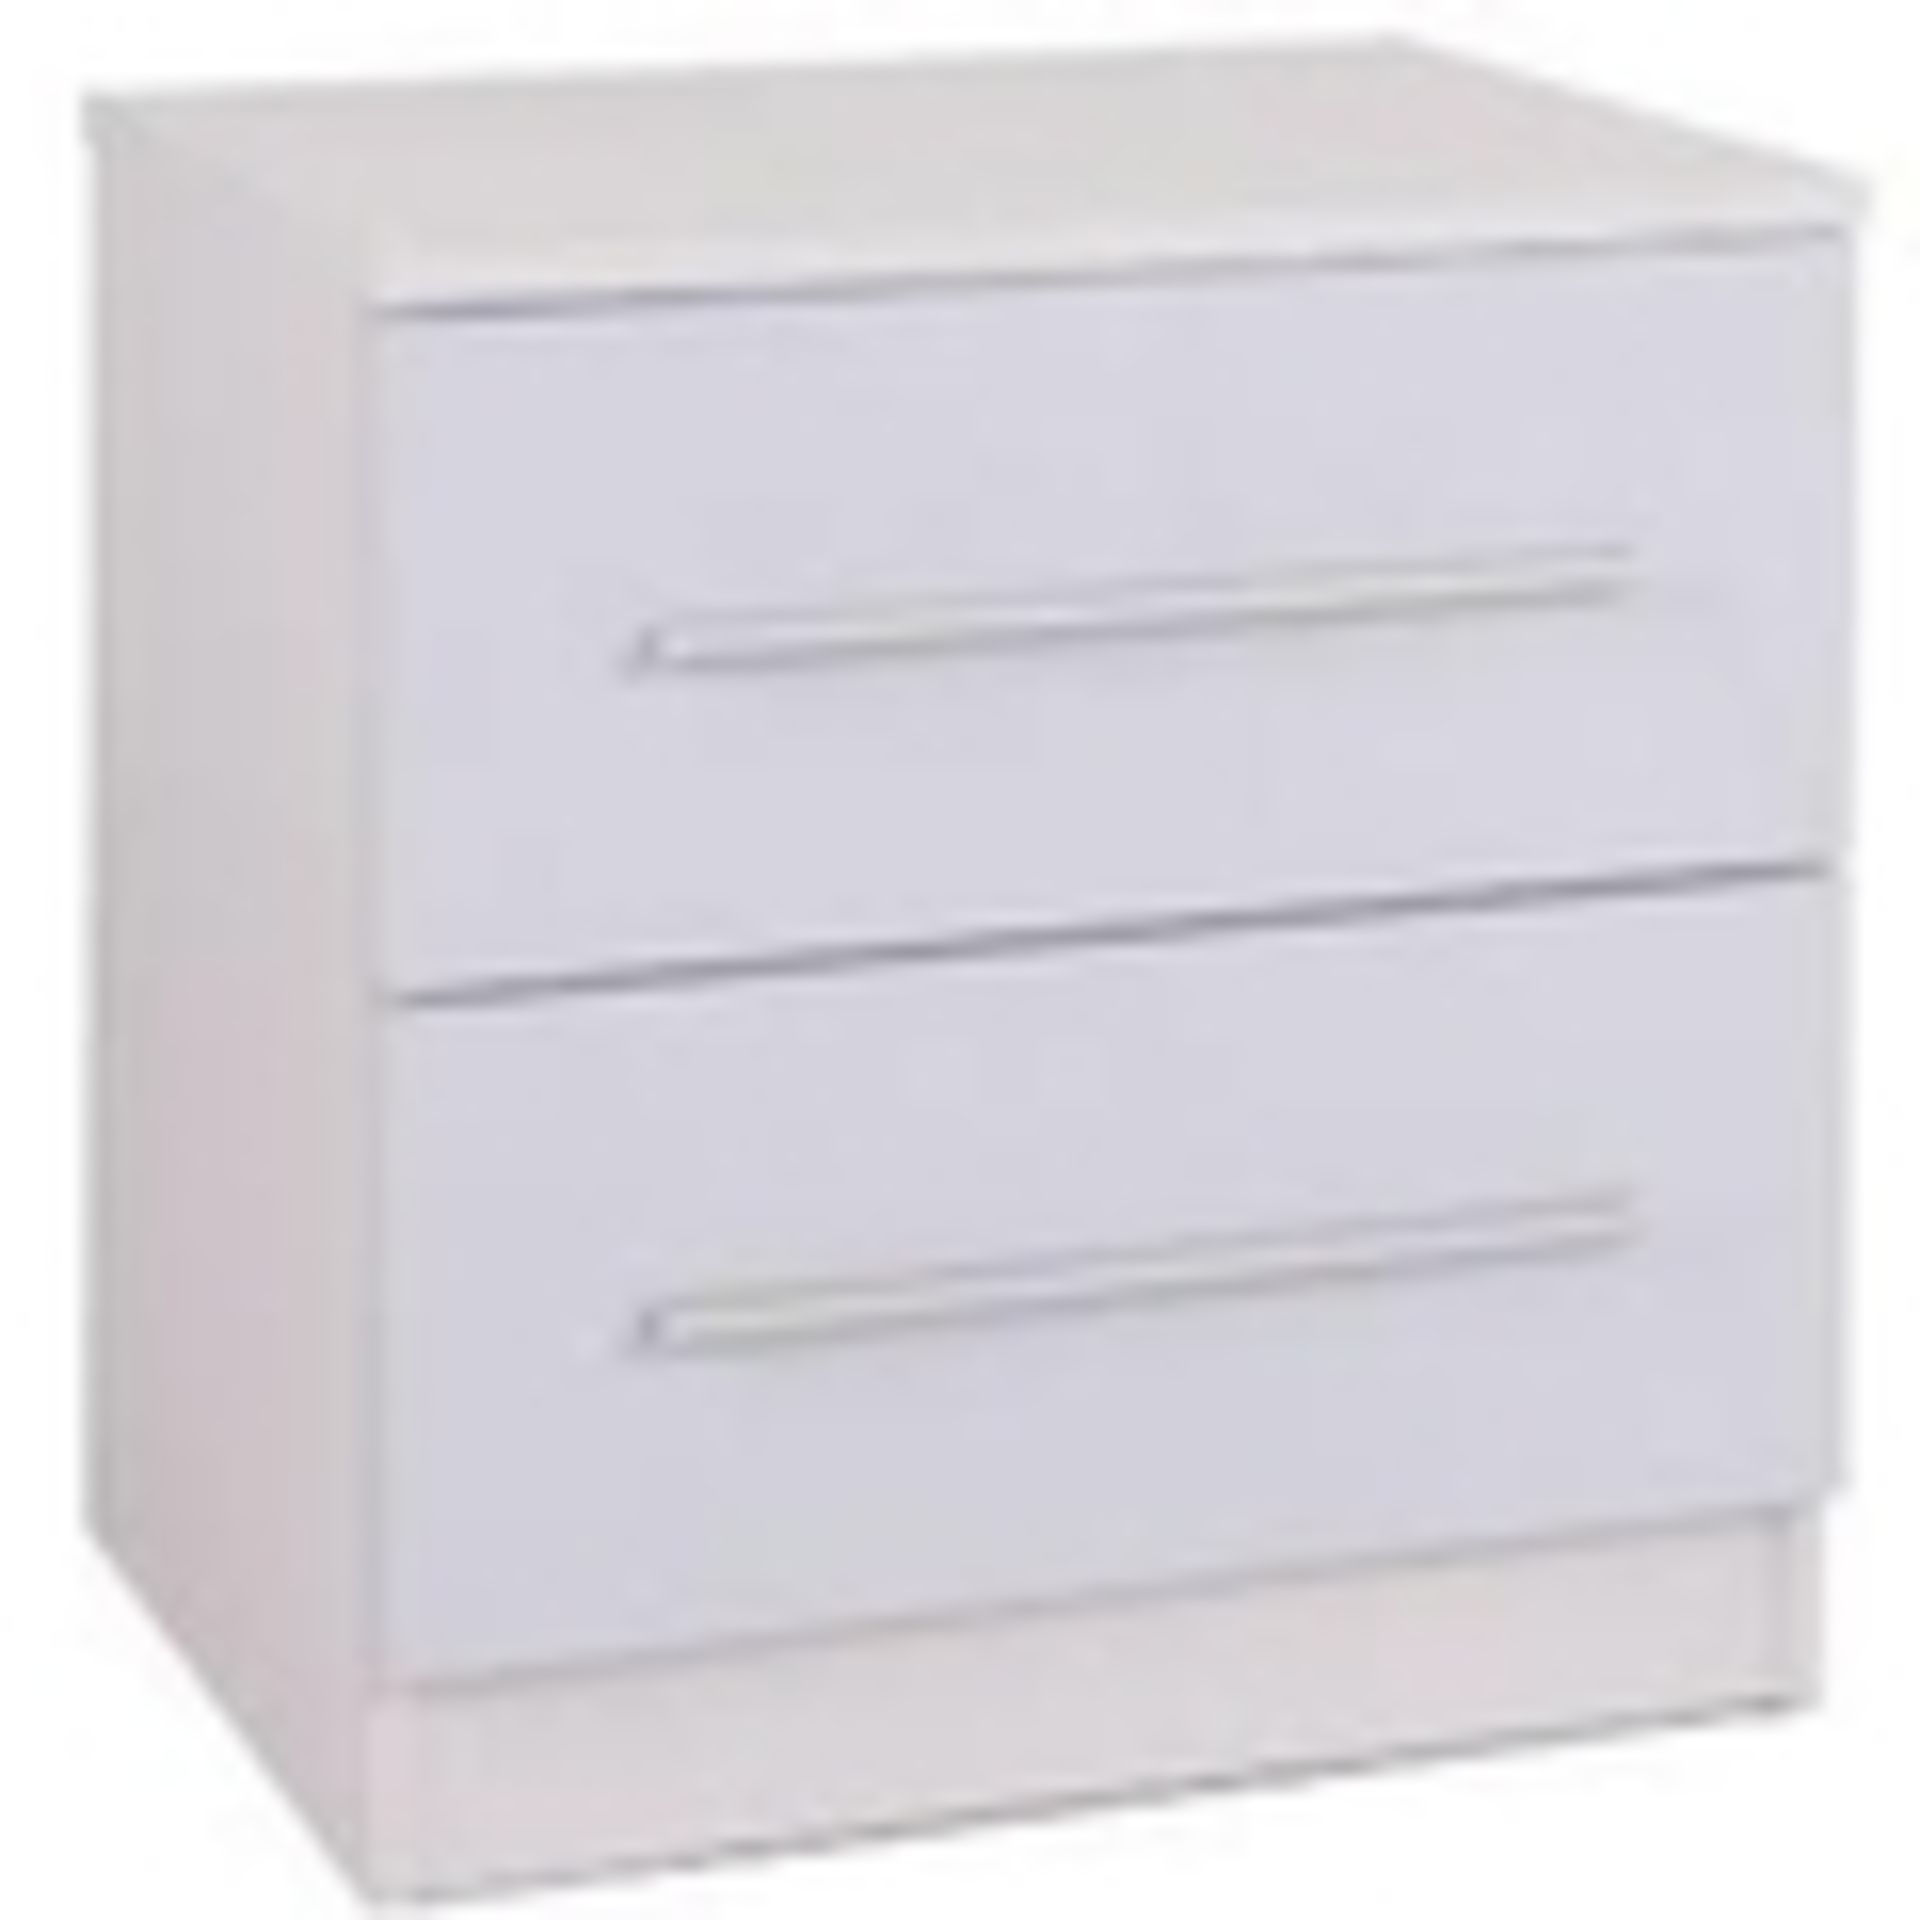 1 BRAND NEW BOXED TORONTO WHITE GLOSS 2 DRAWER BEDSIDE CABINET